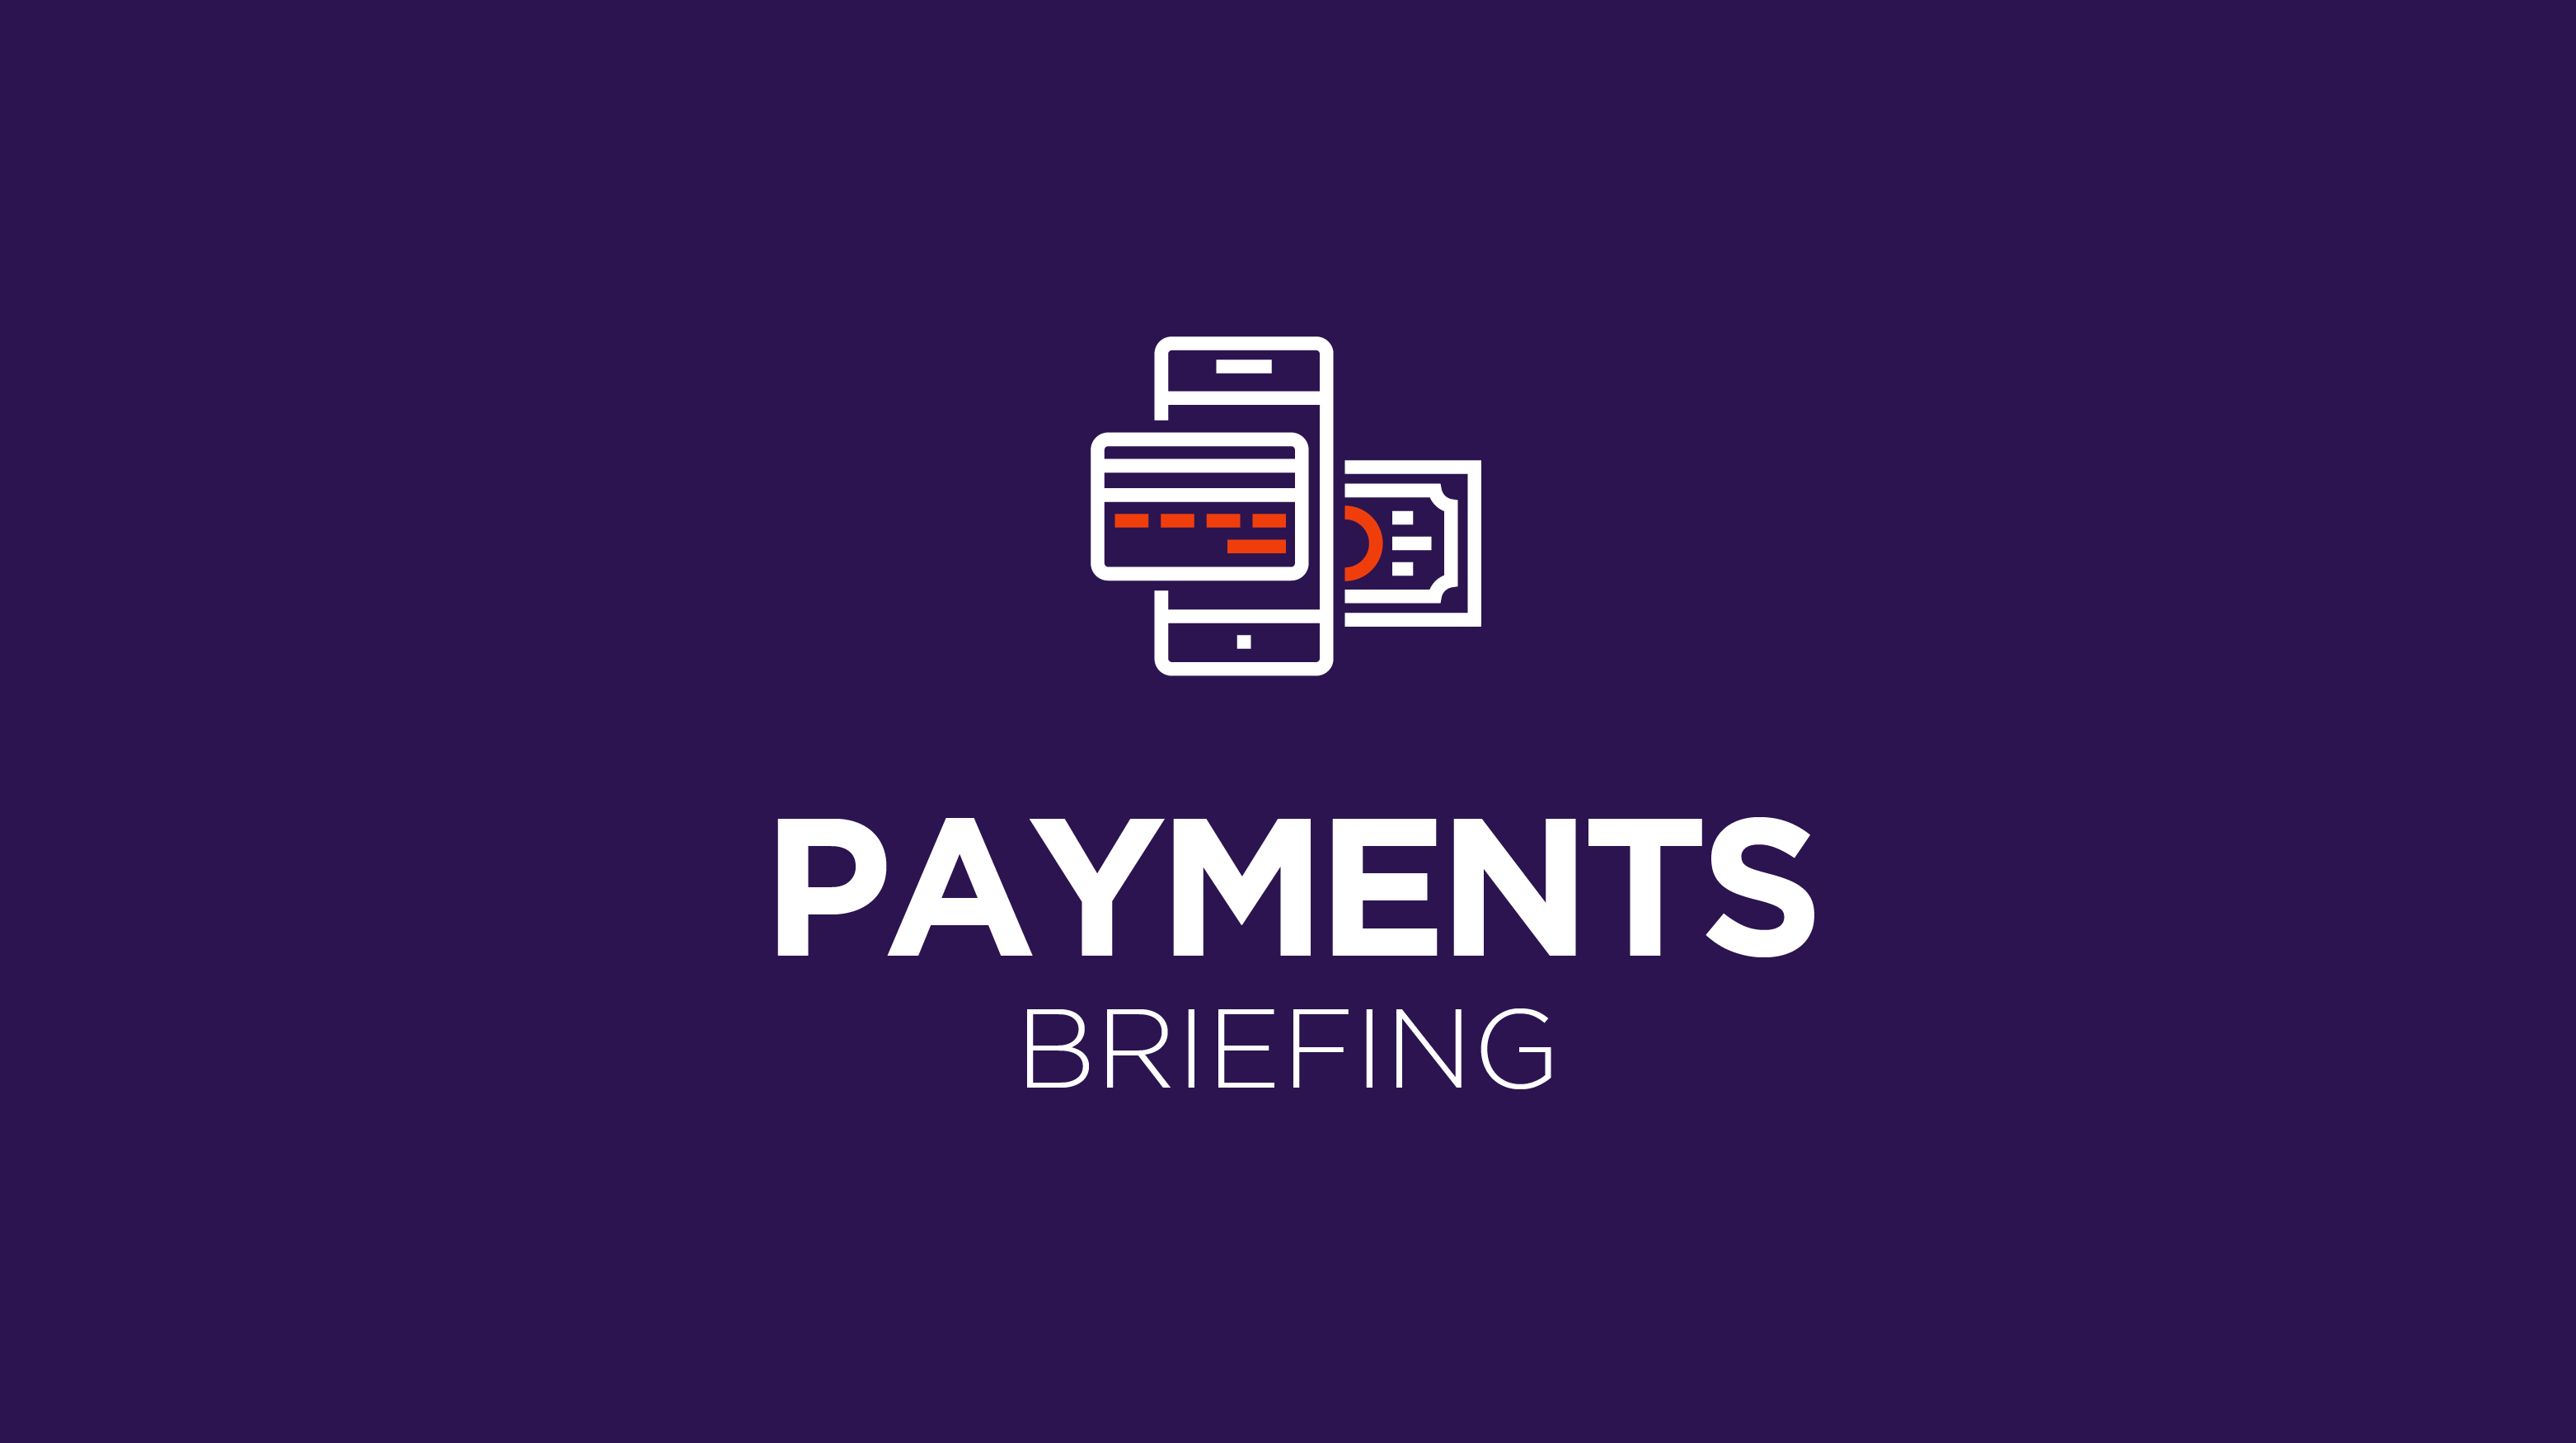 Payments Briefing: Consumers are increasingly turning to flexible payments to counter inflation